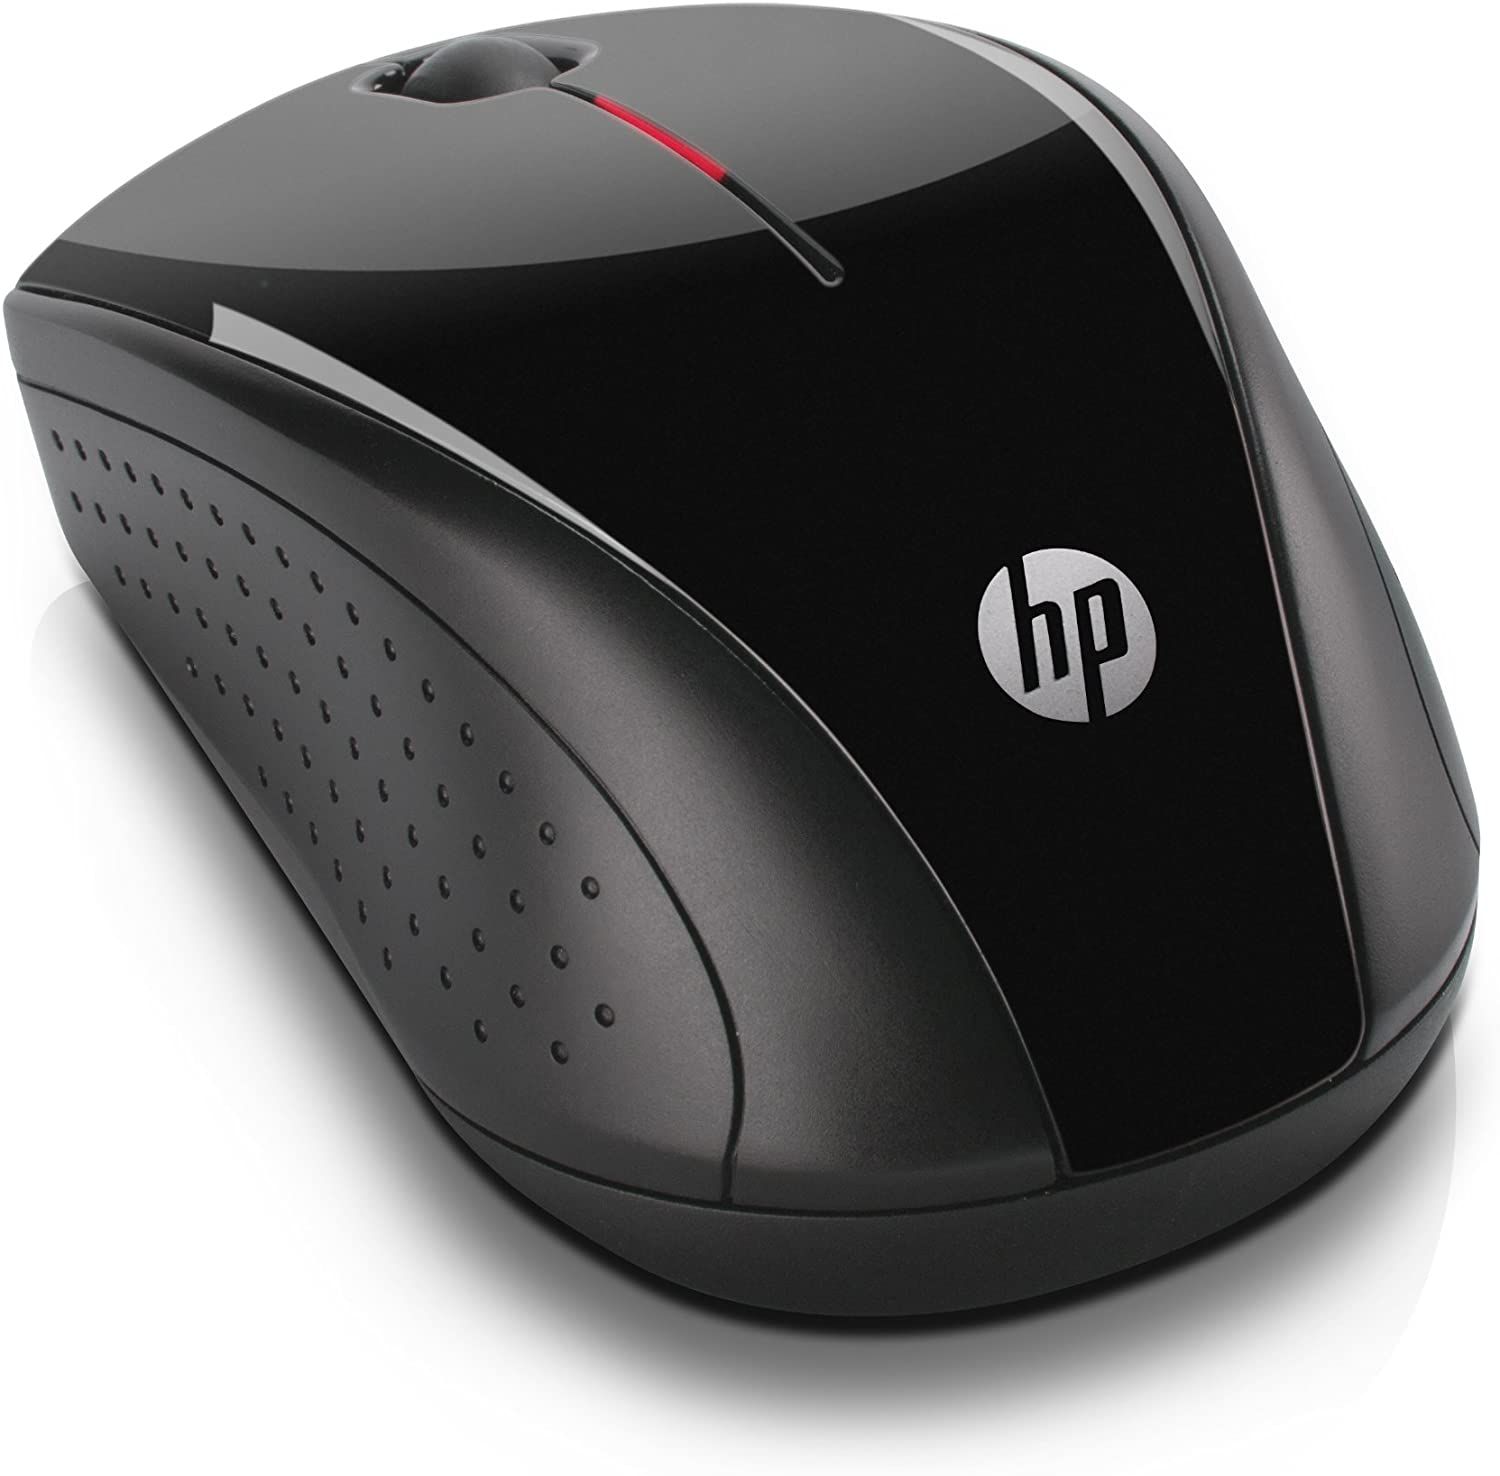 replacing the battery on an hp wireless mouse x3000